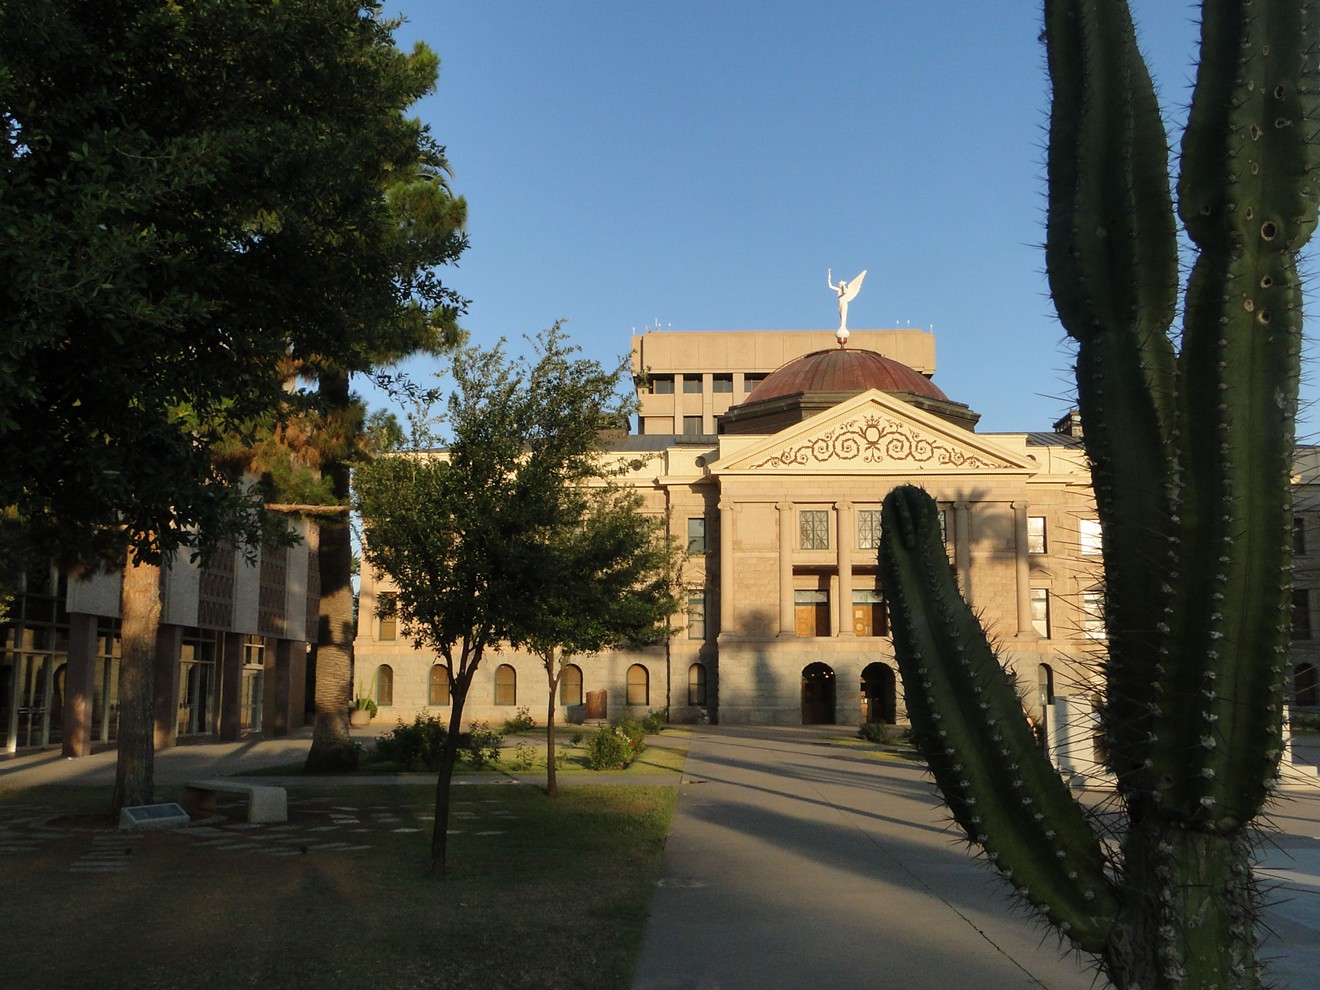 The Arizona State Capitol, where budget negotiations ended well for Arizona Commission on the Arts.